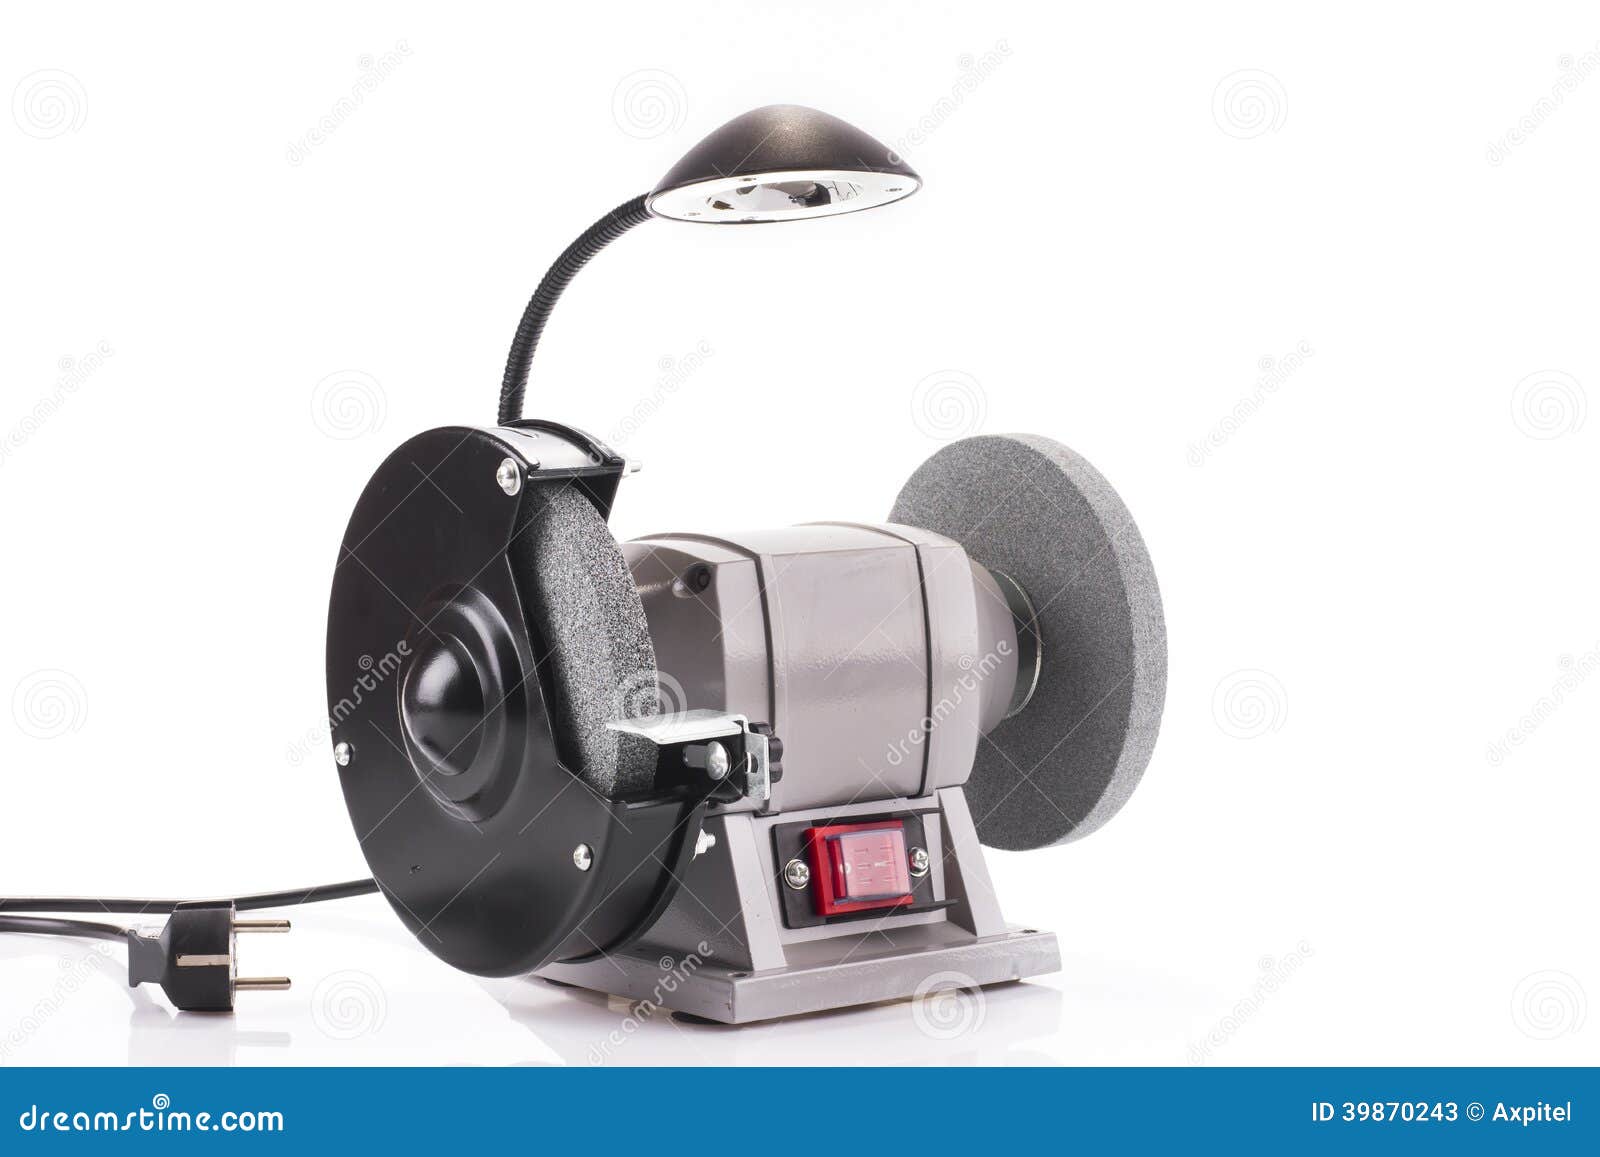 bench grinder with lamp  on white